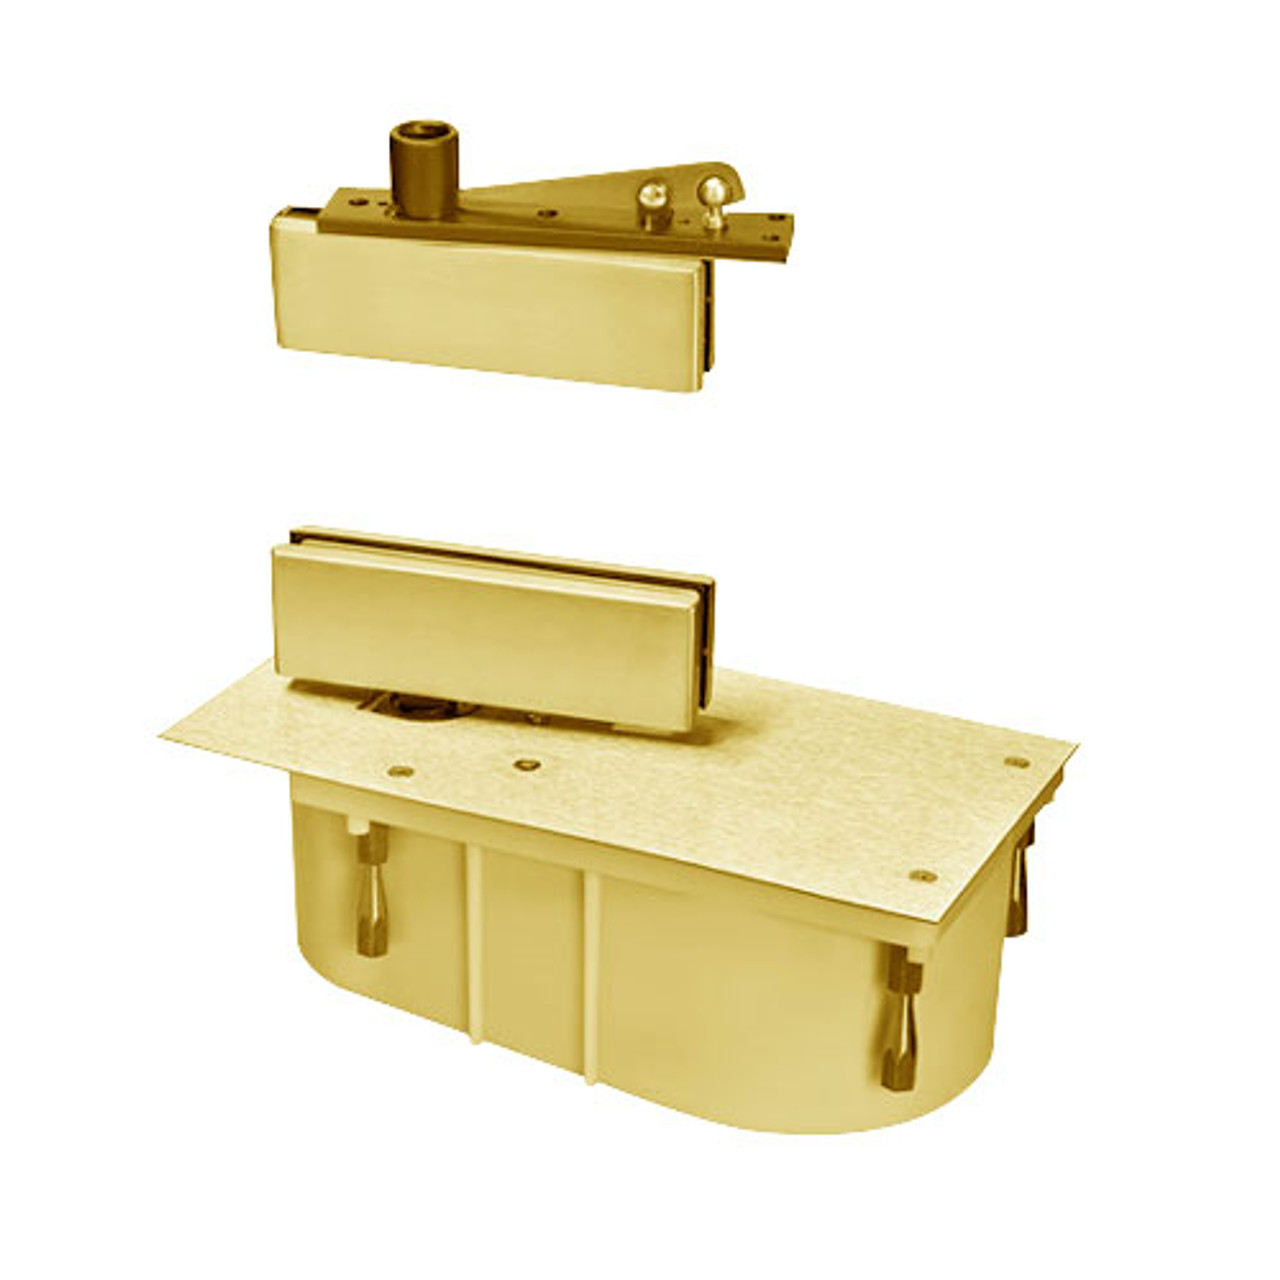 428-95S-LFP-LH-605 Rixson 428 Series Heavy Duty Single Acting Center Hung Floor Closer with Patch Fittings in Bright Brass Finish